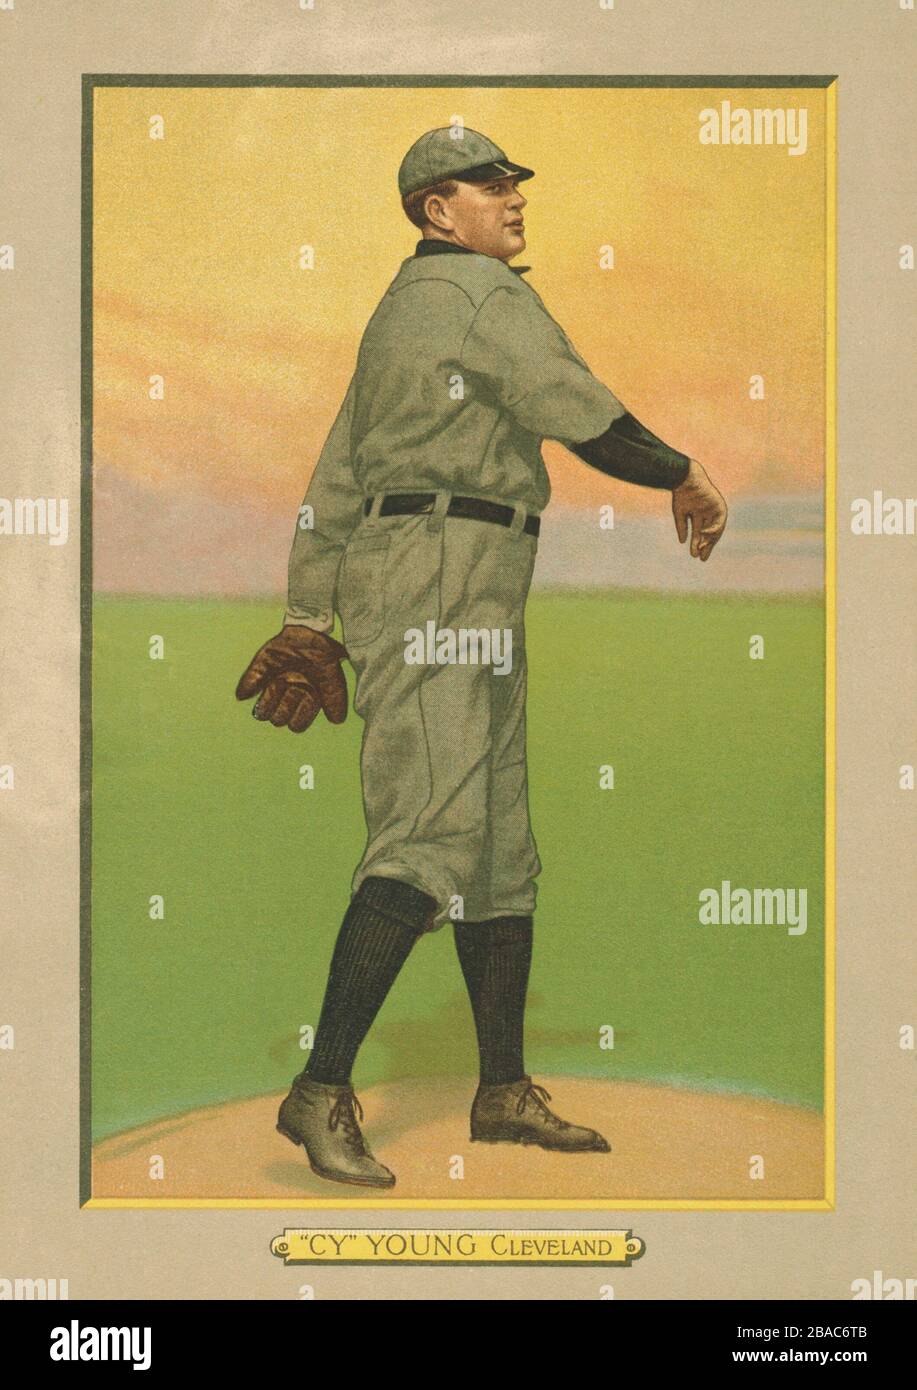 Cy Young, 1911 baseball card, published when he played for the Cleveland Naps (now Indians)  (BSLOC 2018 3 117) Stock Photo